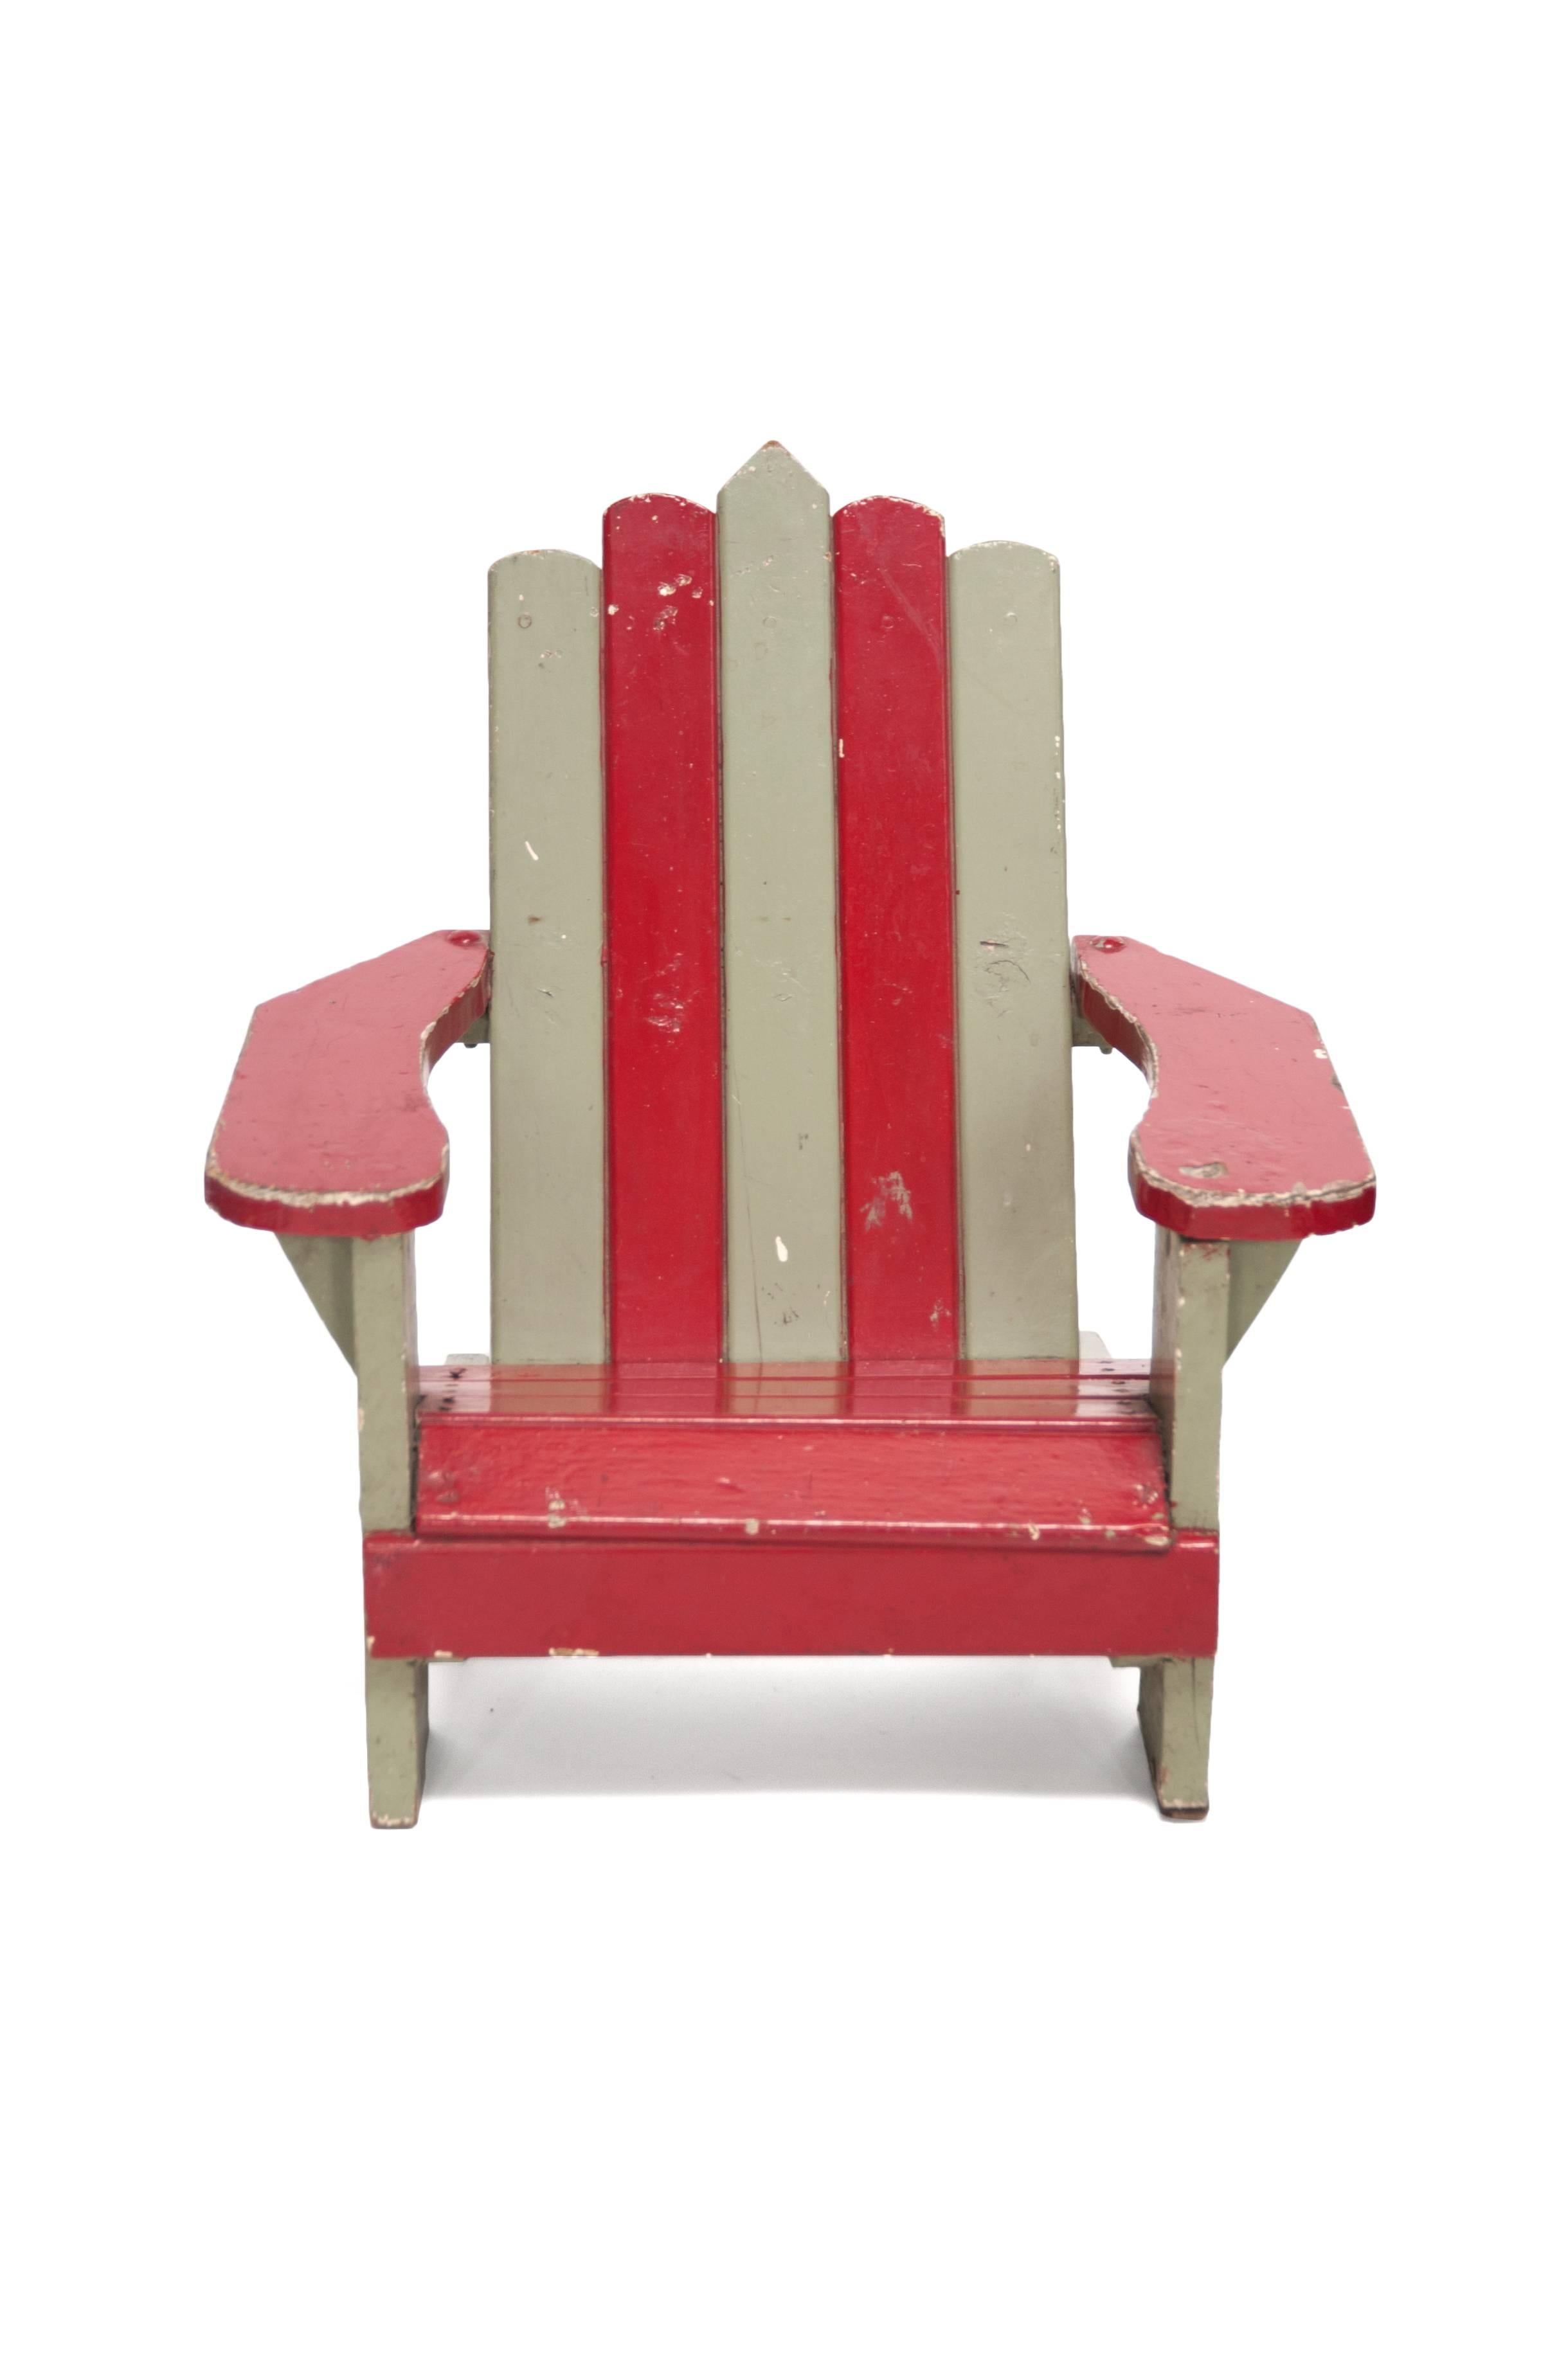 Striped child Adirondack chair, designer unknown, USA, 1930s.

Striped child Adirondack chair
Designer unknown, USA, 1930s.
Painted wood
Measures: H 18.5 in, W 17.75 in, D 14.75 in (seat H 6.5 in).